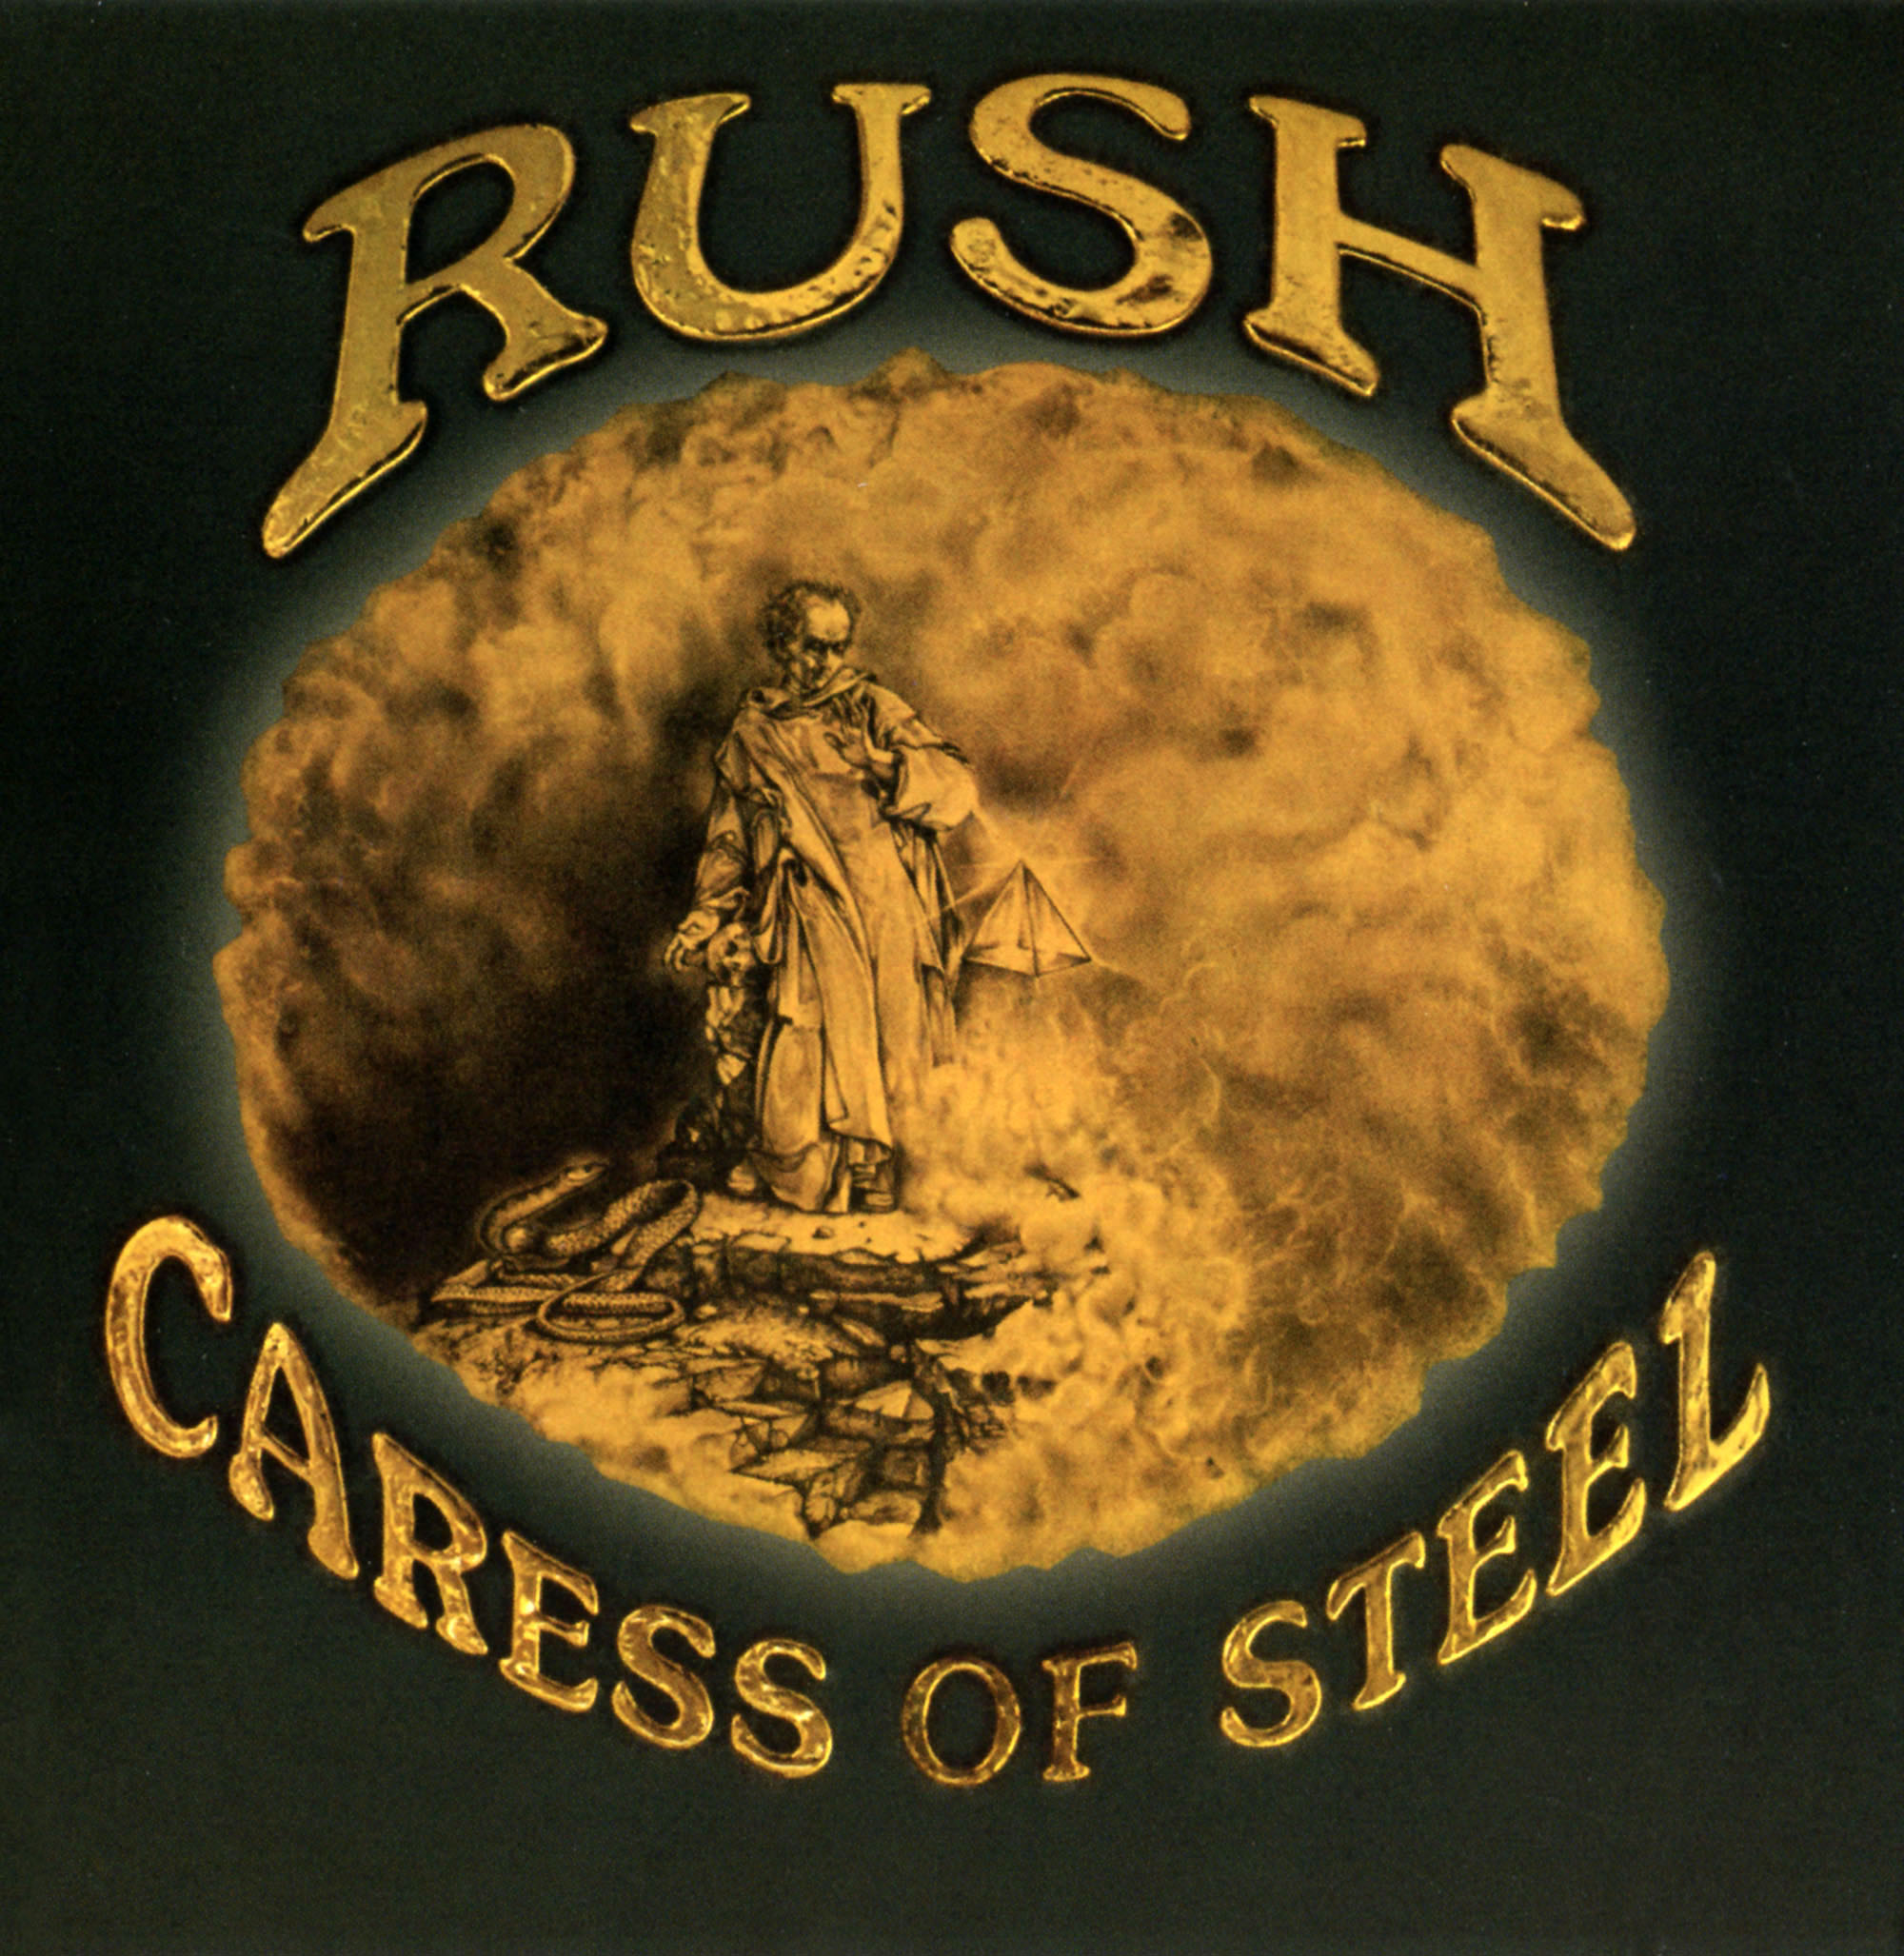 Caress of Steel by Rush album cover